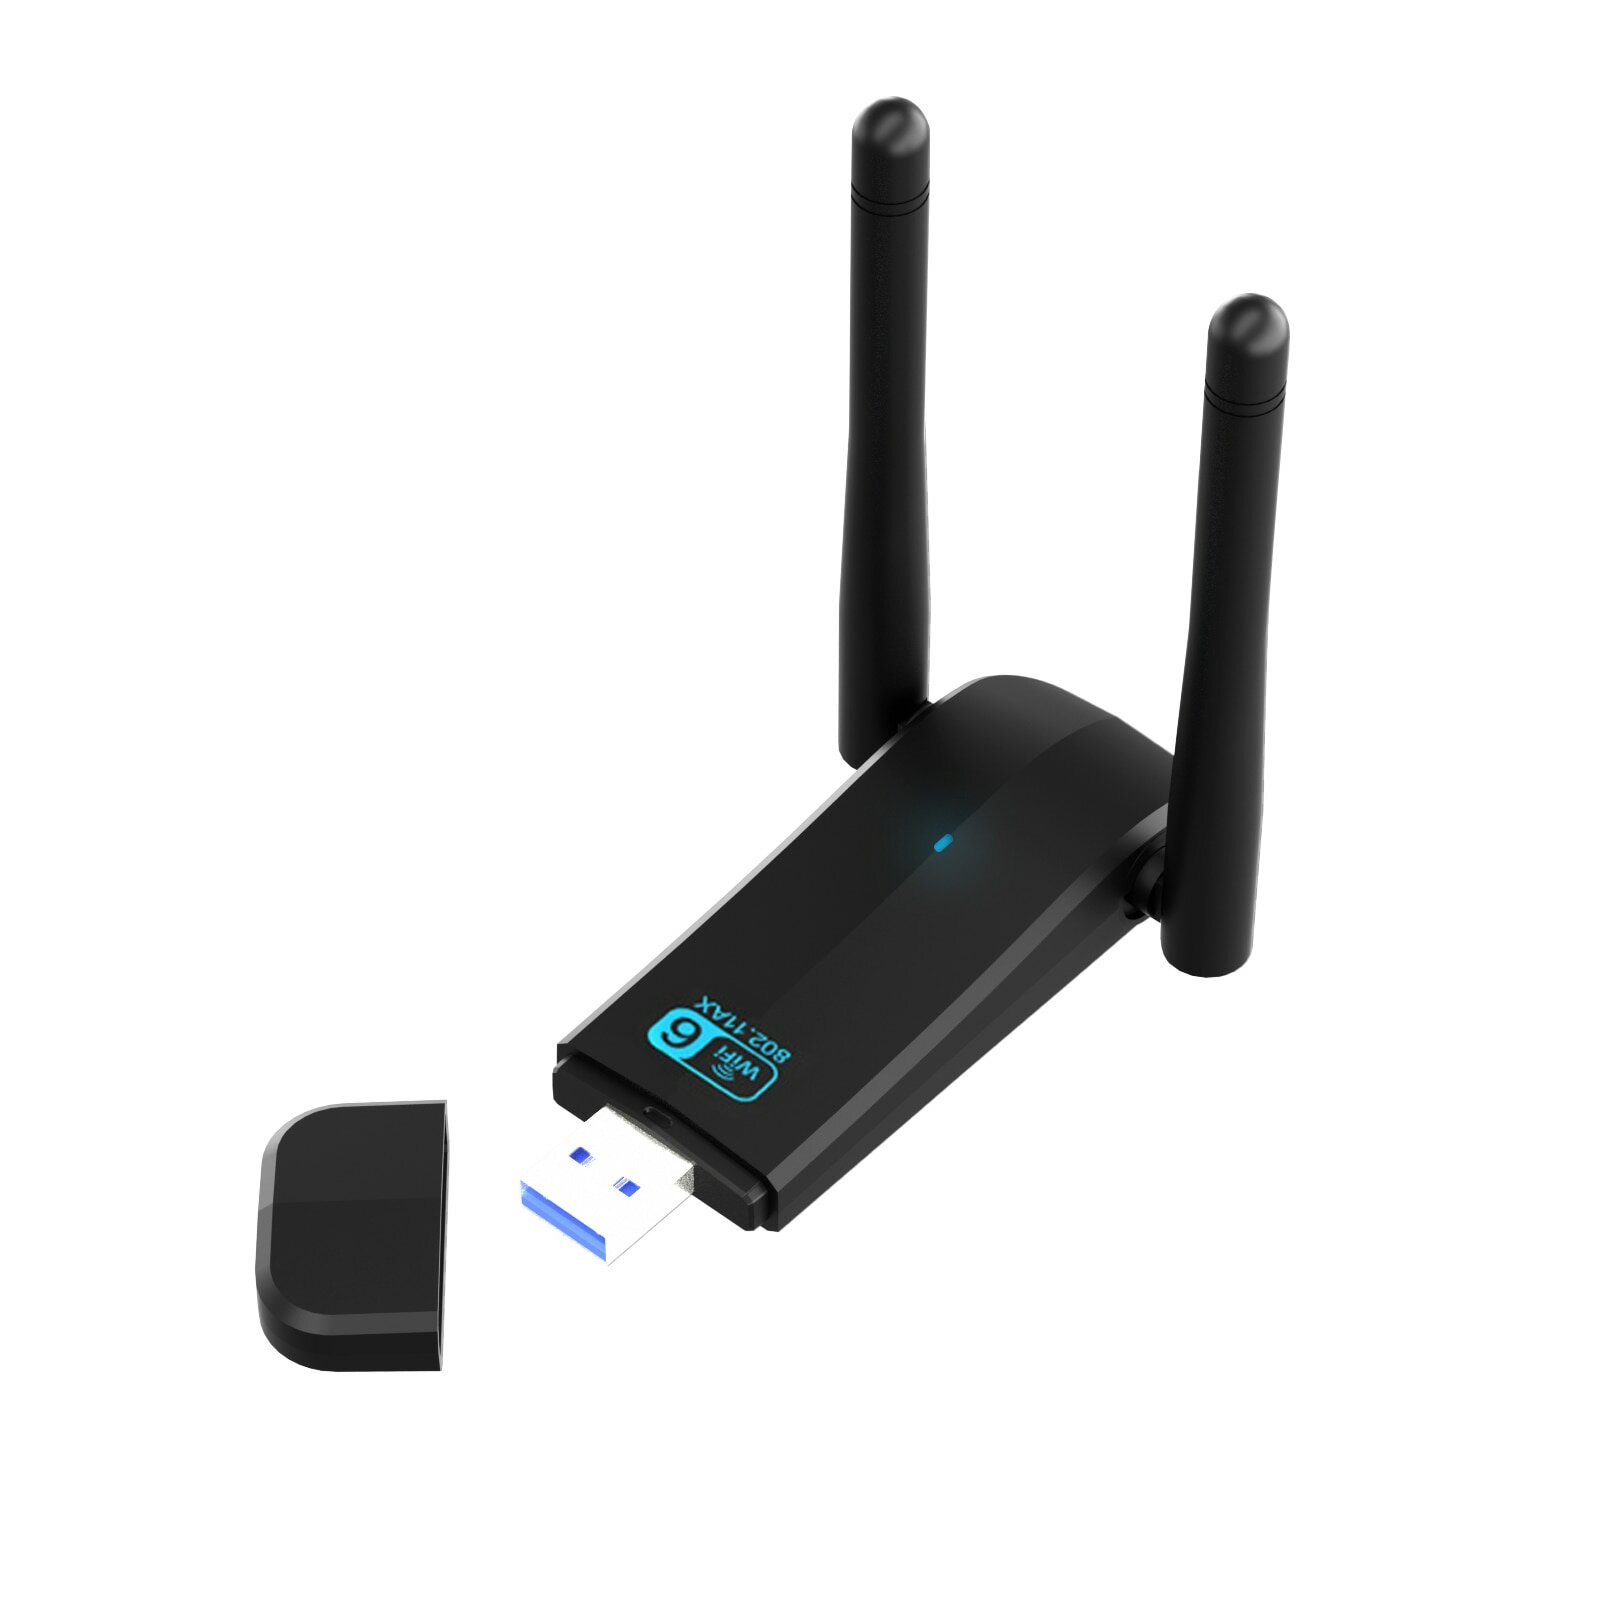 WiFi 6 USB Adapter Dual Band AX1800 2.4G/5GHz Wireless Wi-Fi Dongle Network Card USB 3.0 WiFi6 Adapter For Windows 7/10/